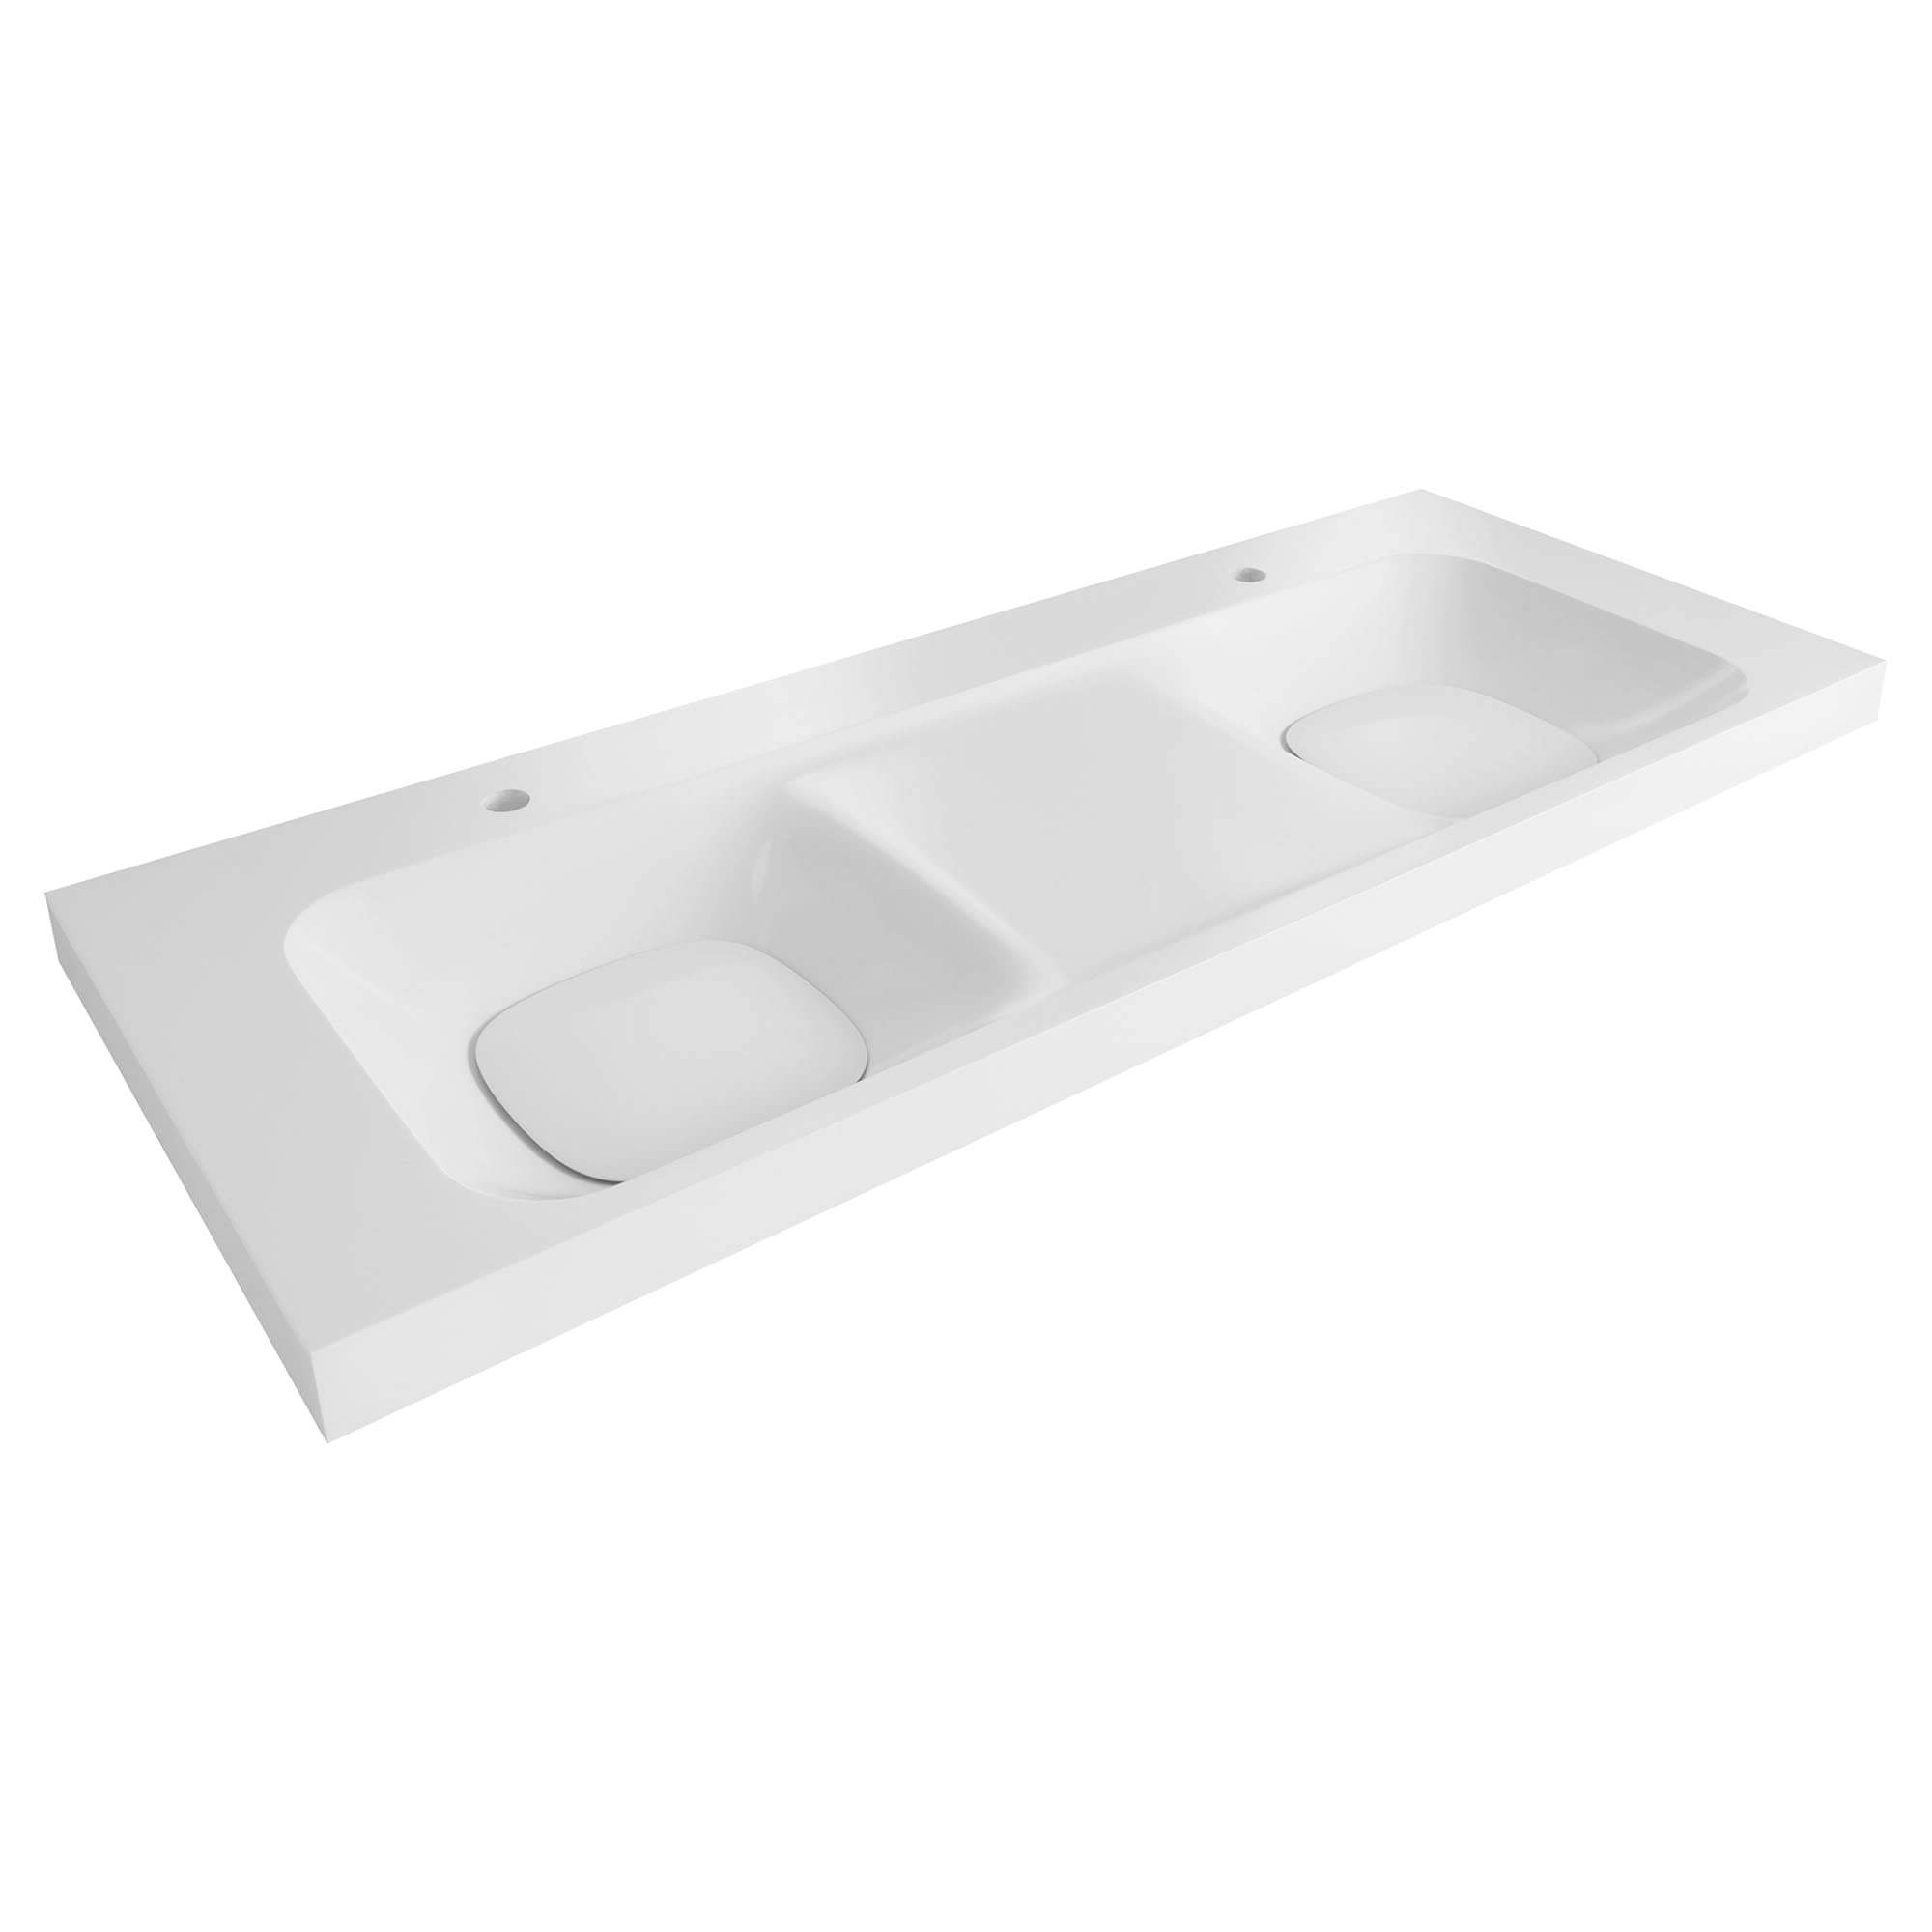 DXV Modulus® Above Counter Sink, 2 Single Hole